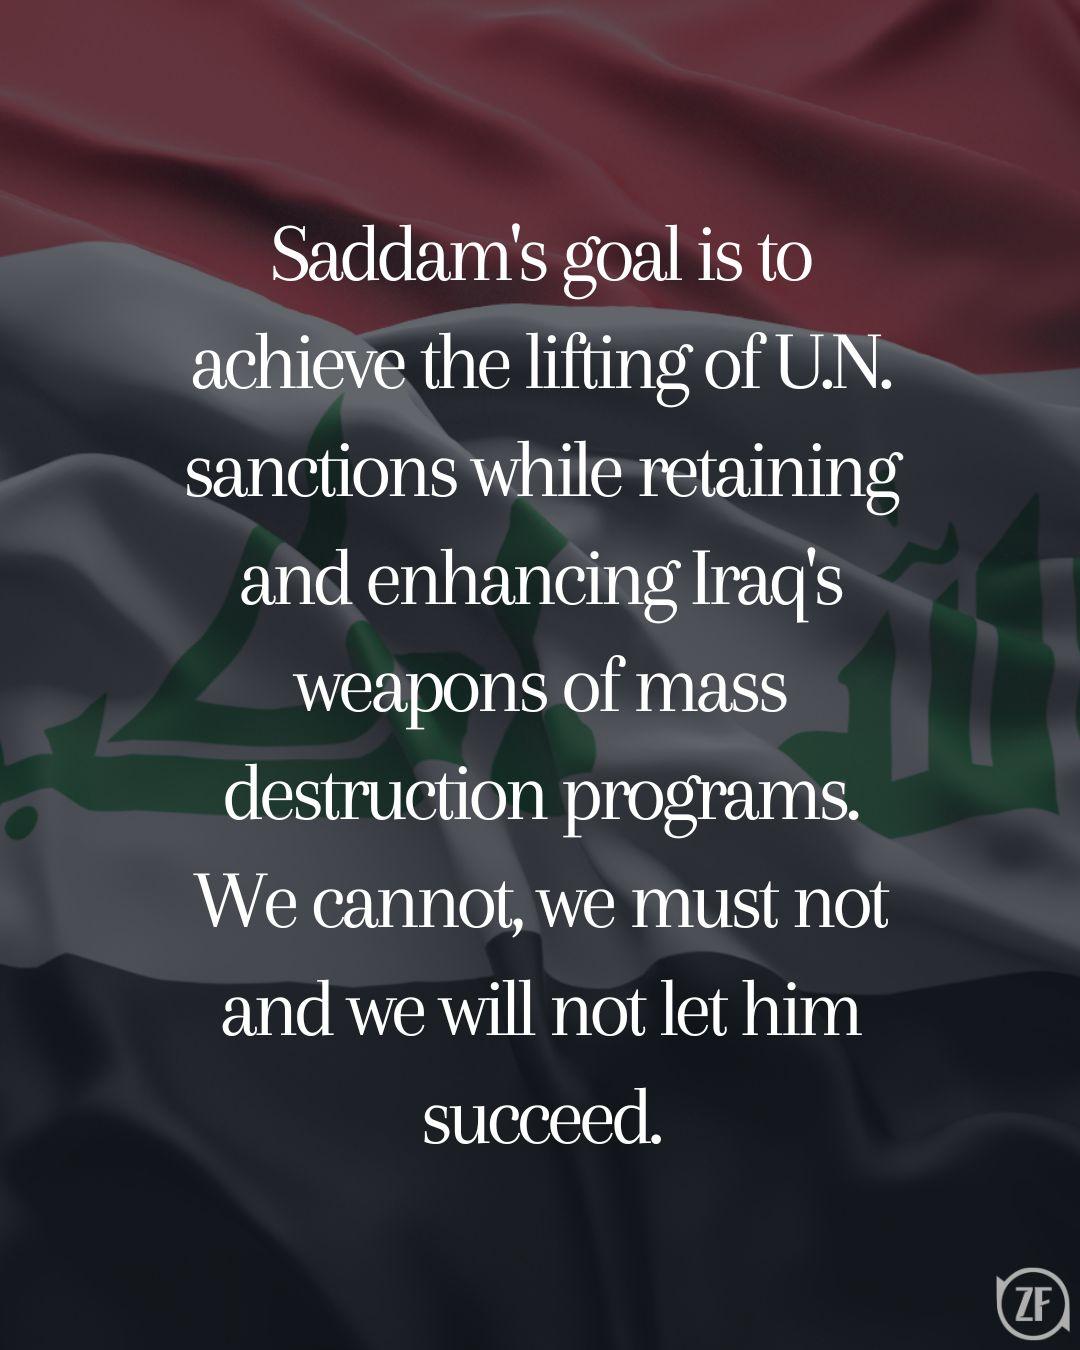 Saddam's goal is to achieve the lifting of U.N. sanctions while retaining and enhancing Iraq's weapons of mass destruction programs. We cannot, we must not and we will not let him succeed.